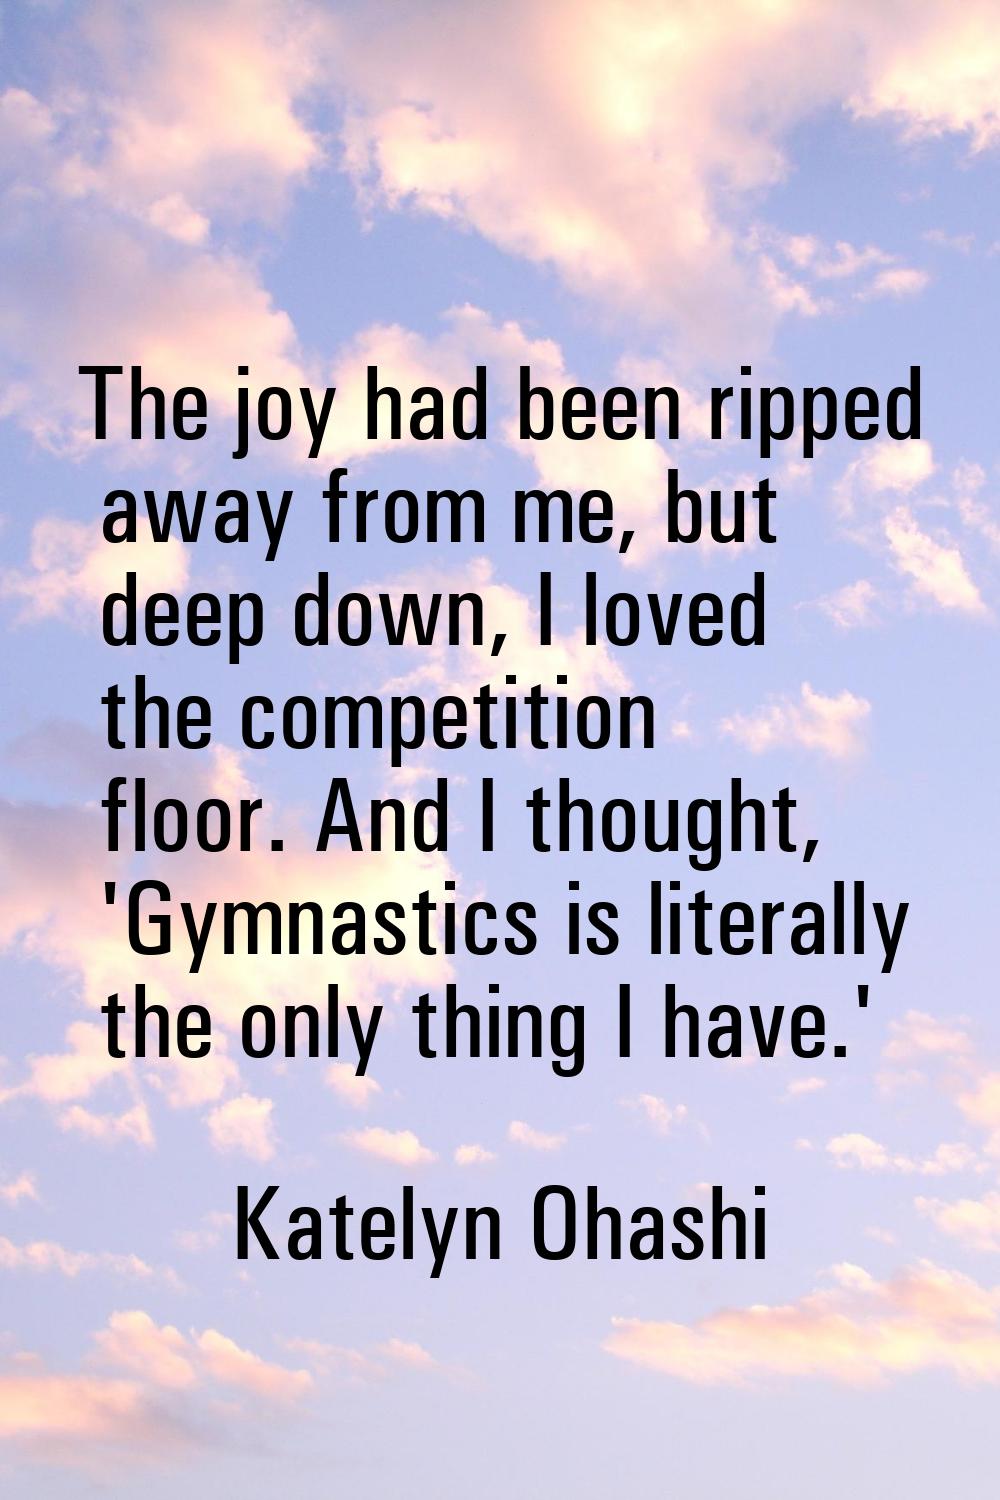 The joy had been ripped away from me, but deep down, I loved the competition floor. And I thought, 